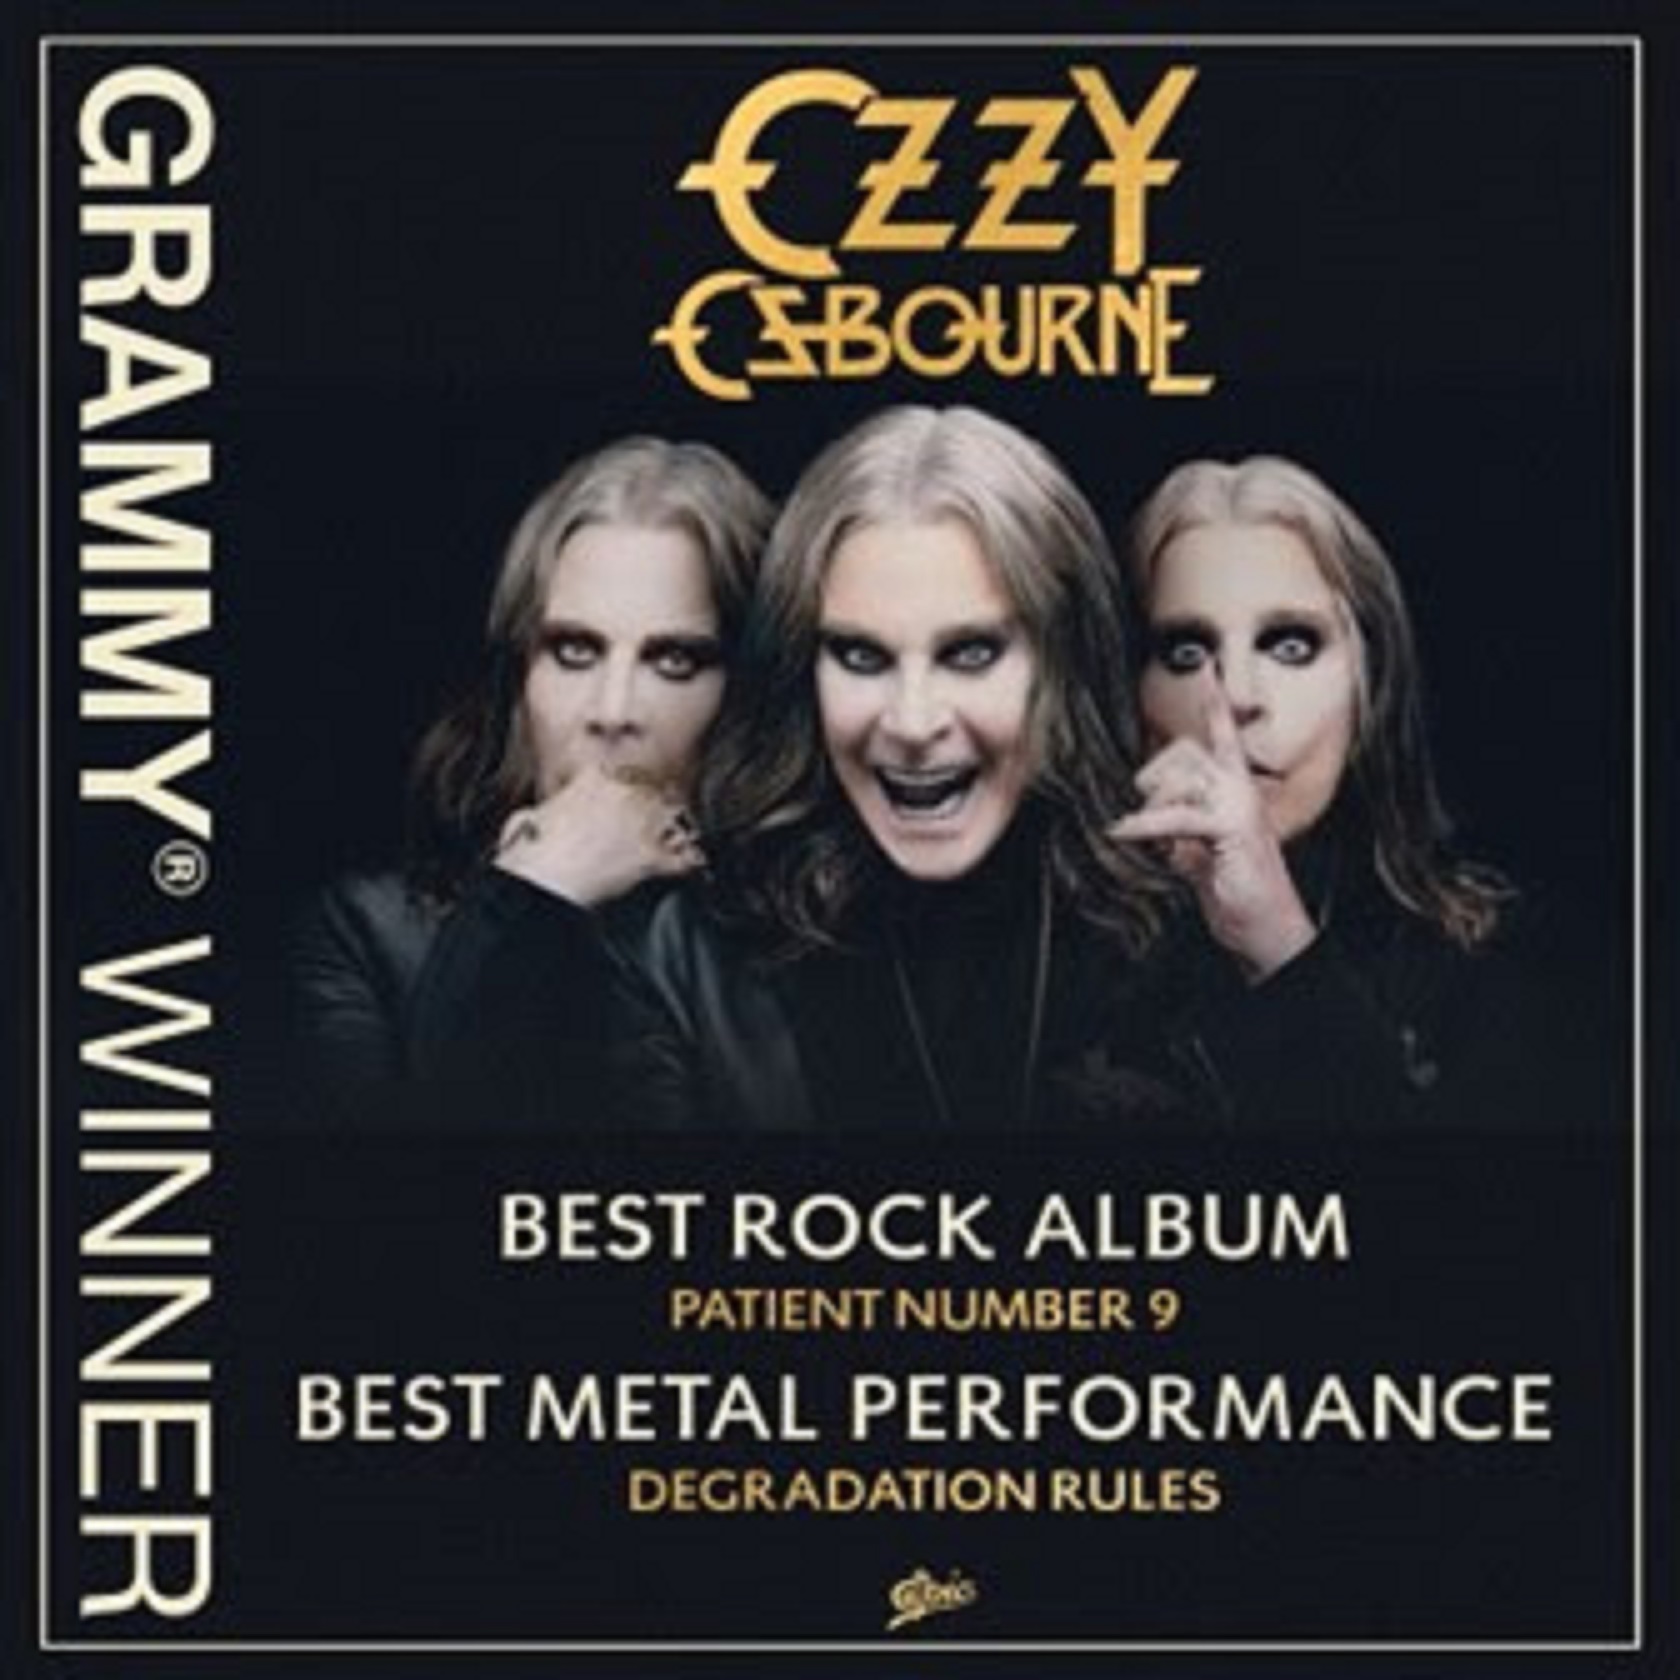 OZZY OSBOURNE WINS “BEST ROCK ALBUM” AND “BEST METAL PERFORMANCE” AT 65TH GRAMMY AWARDS